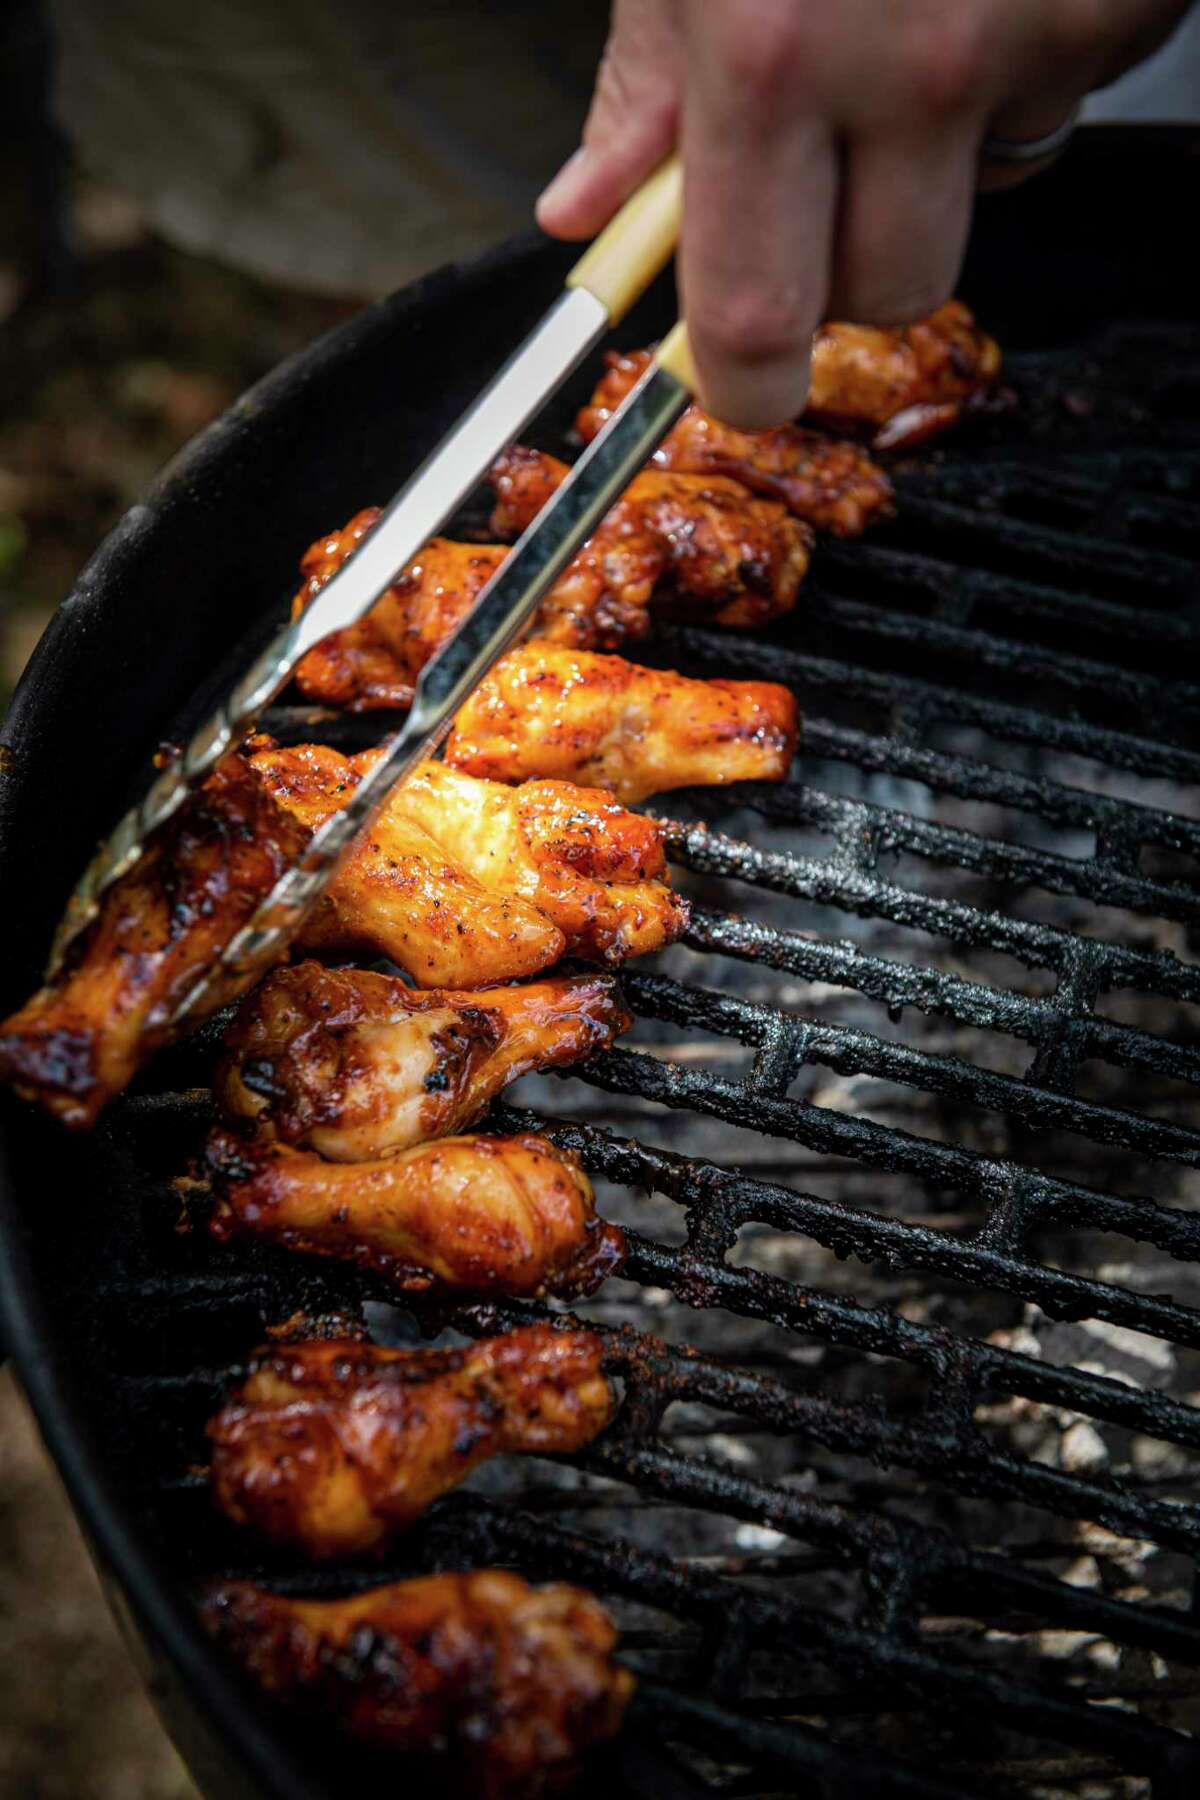 Chicken wings are grilled up using Crawford’s Barbecue Alamo Dust.